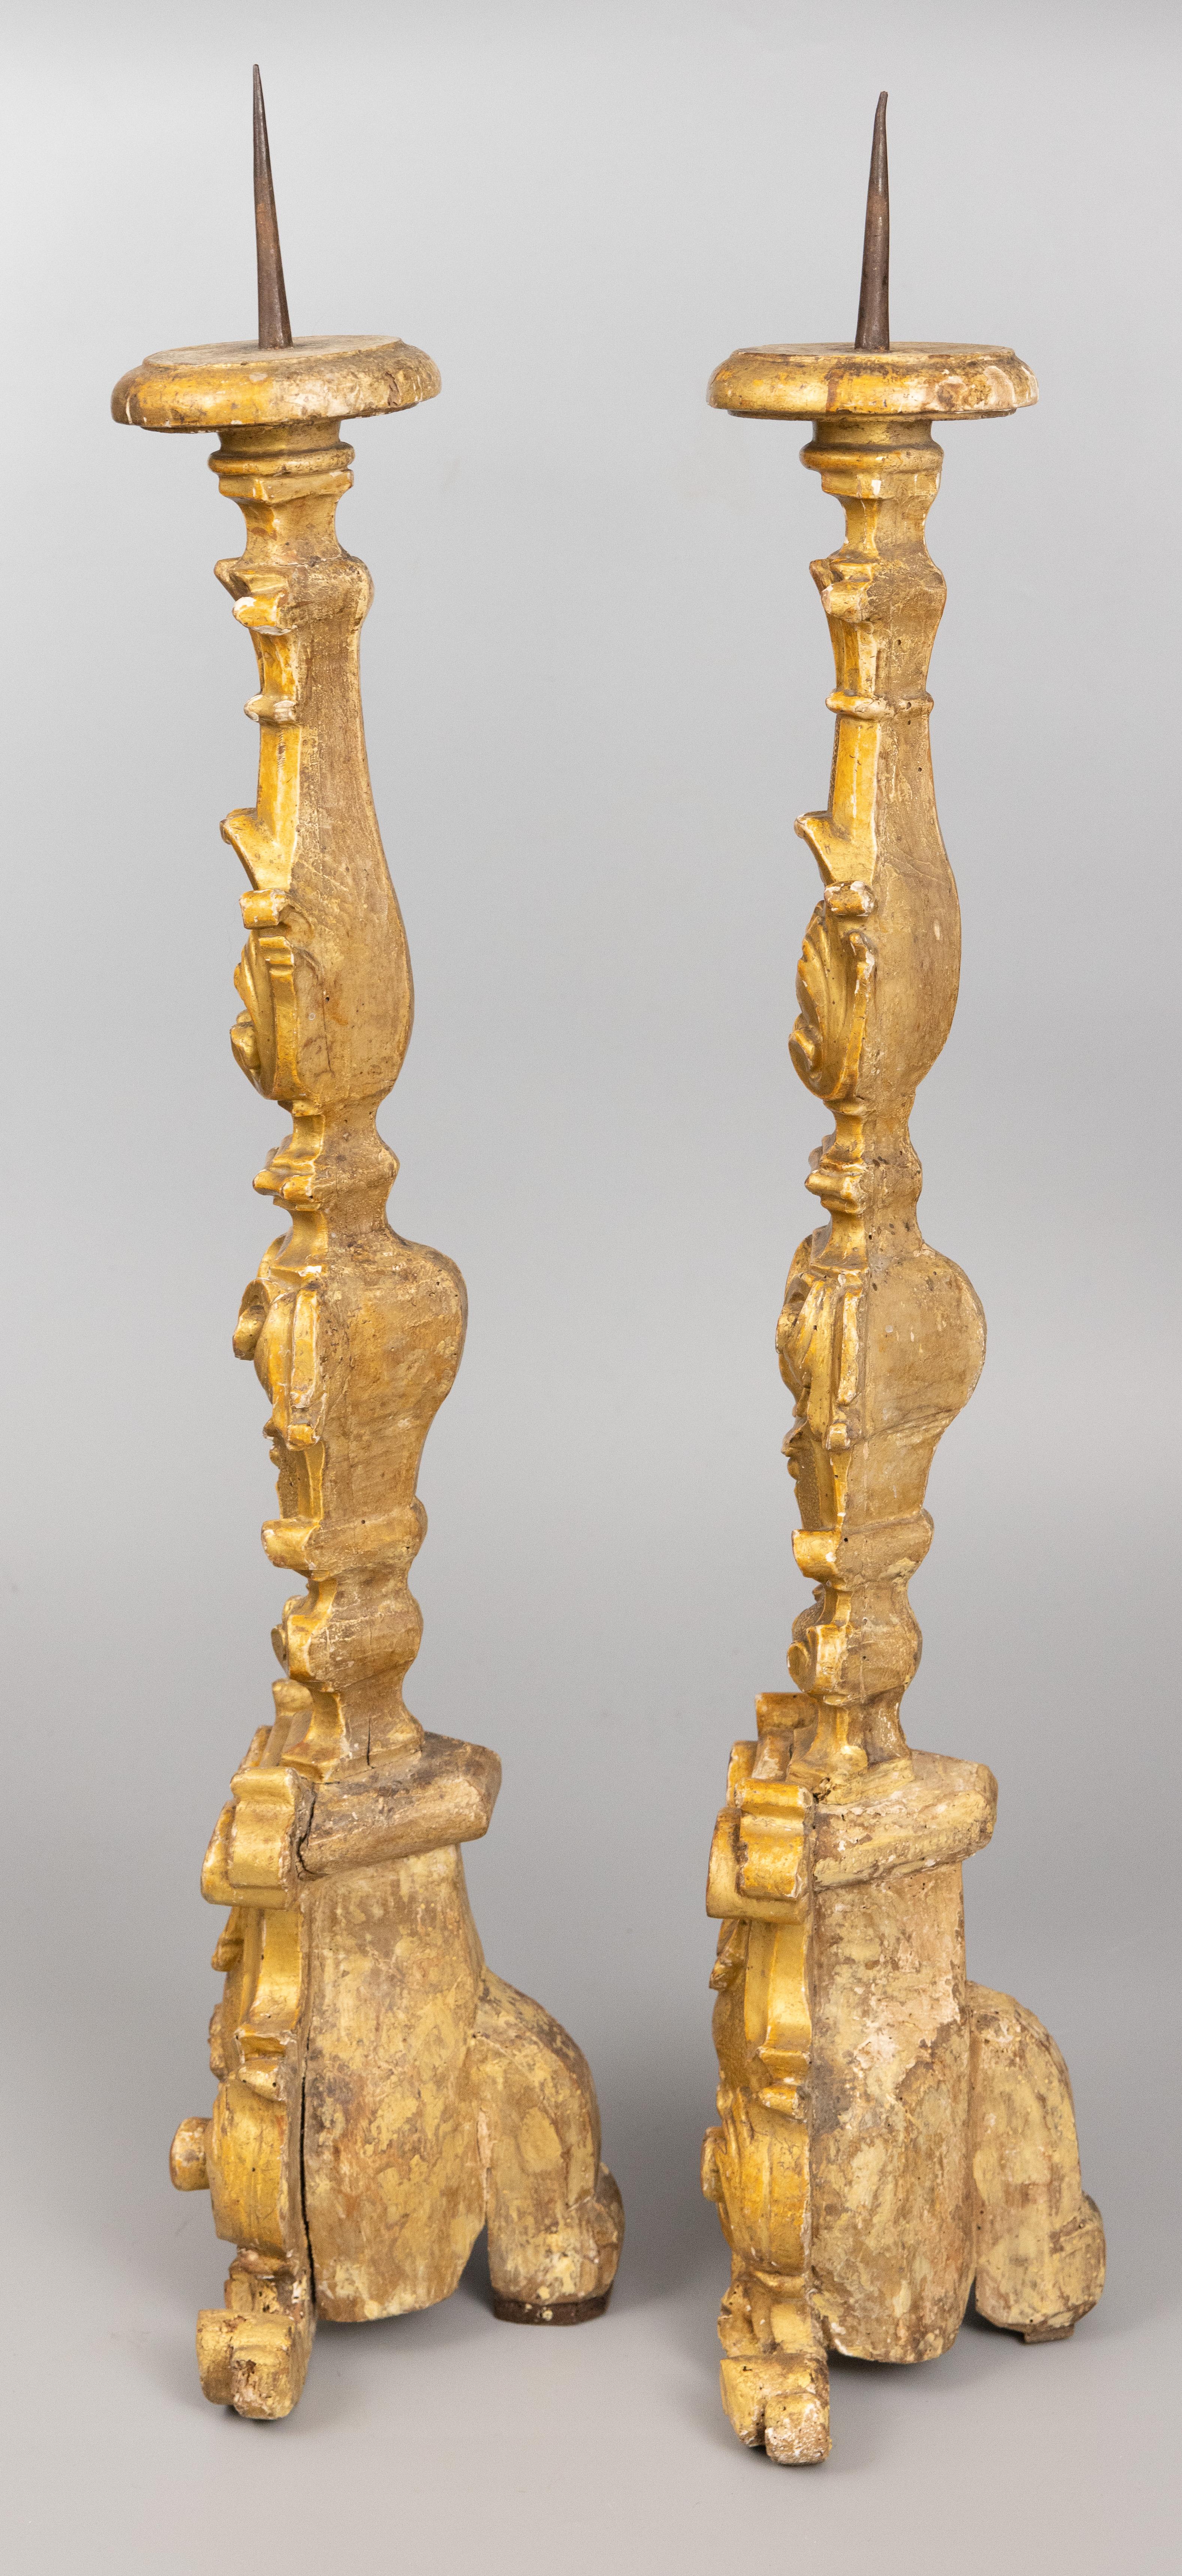 Pair of 19th C. Italian Giltwood Floor Pricket Candlesticks Torchieres For Sale 1